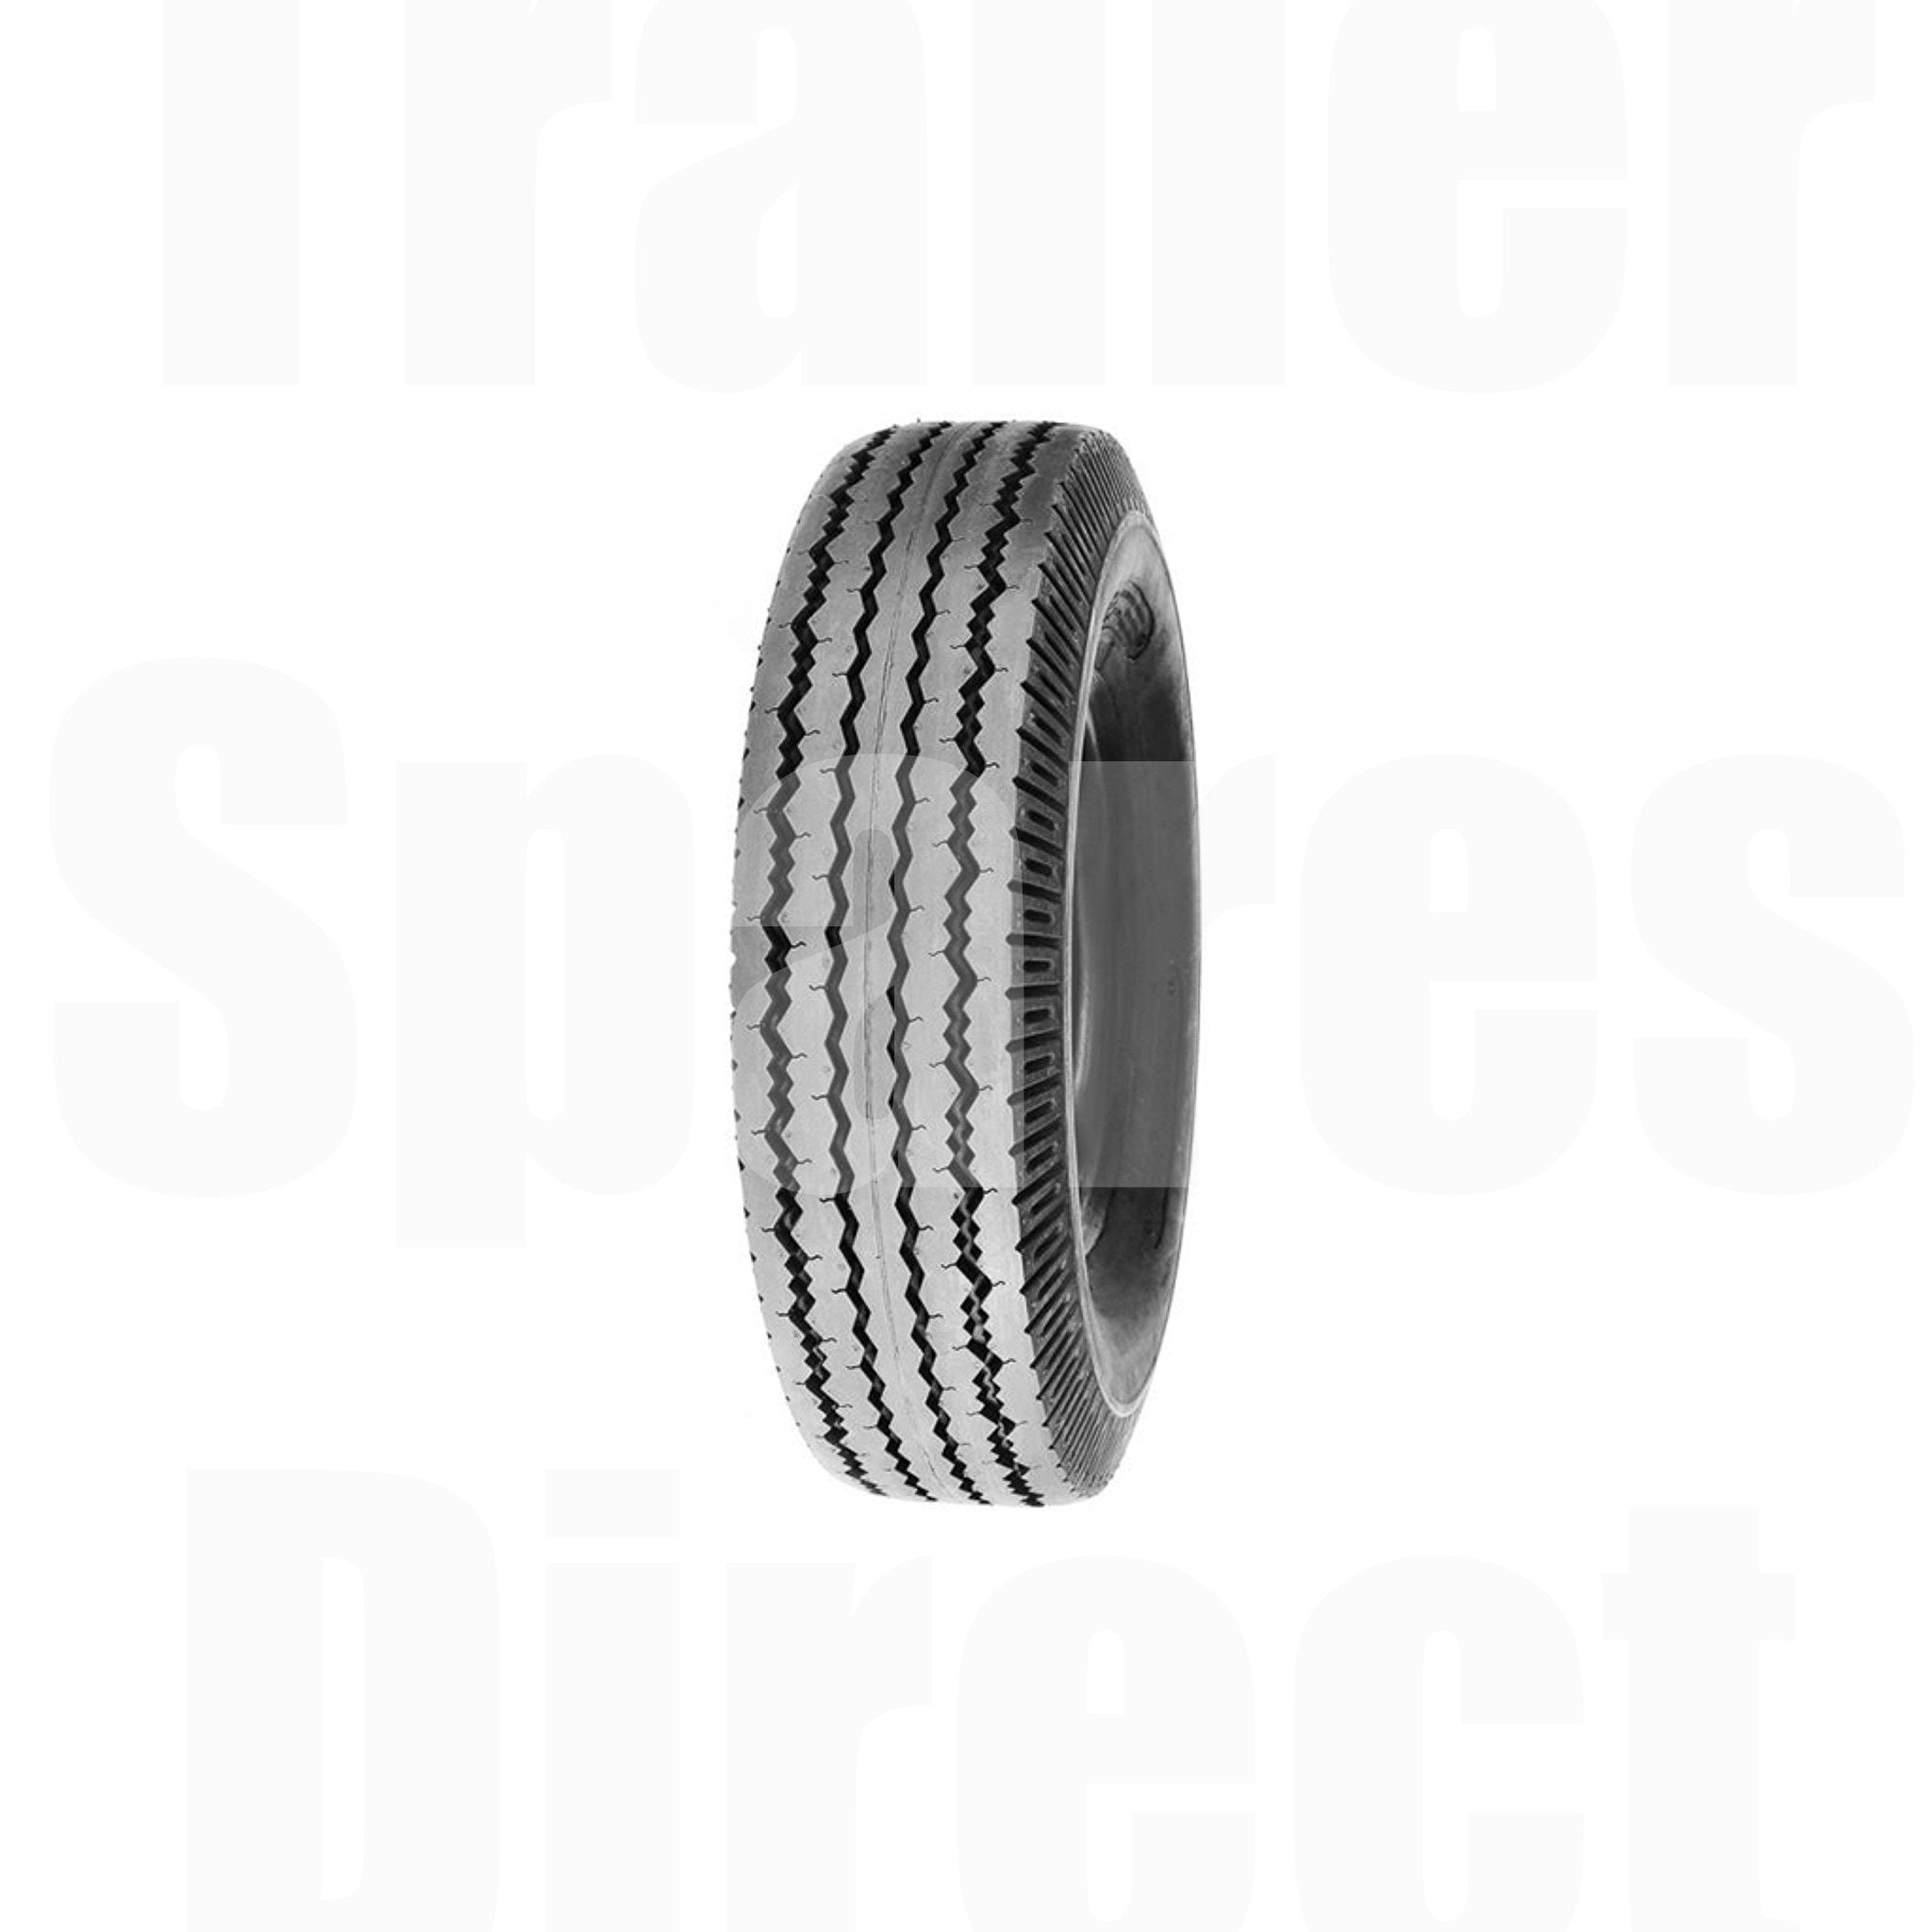 10 inch small trailer tyre 8 ply